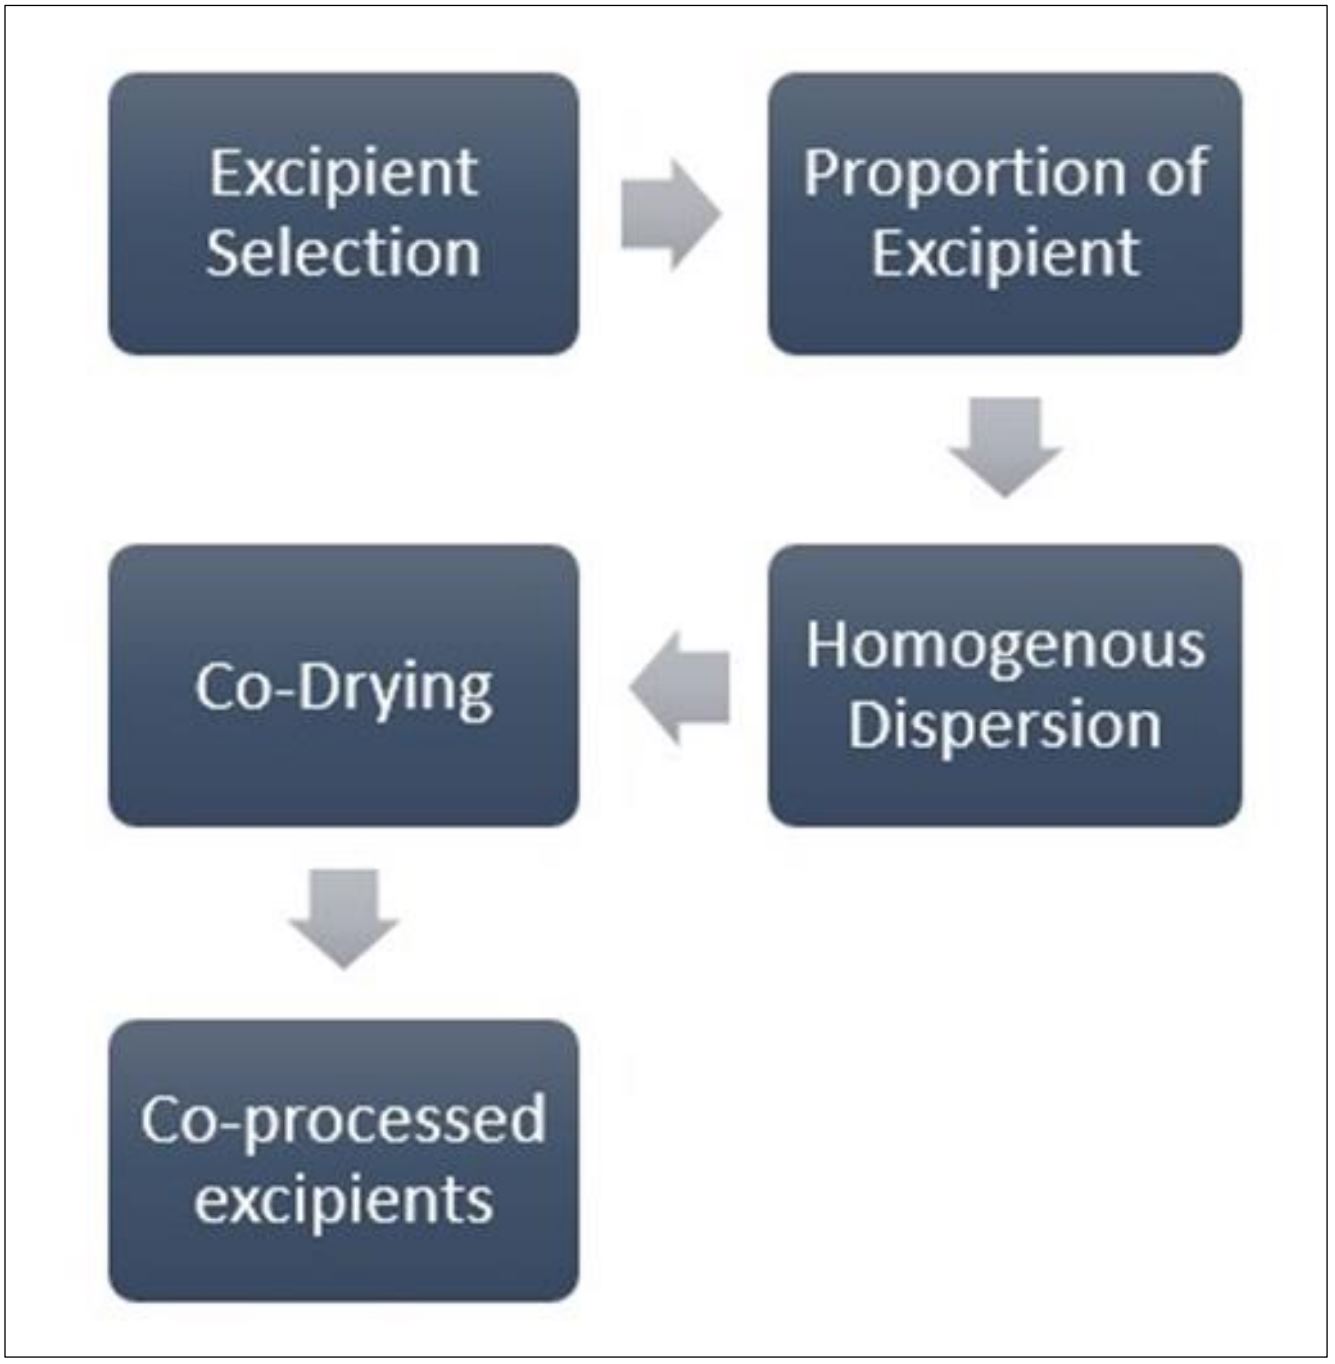 A review on co-processed excipients used in direct compression of tablet dosage form